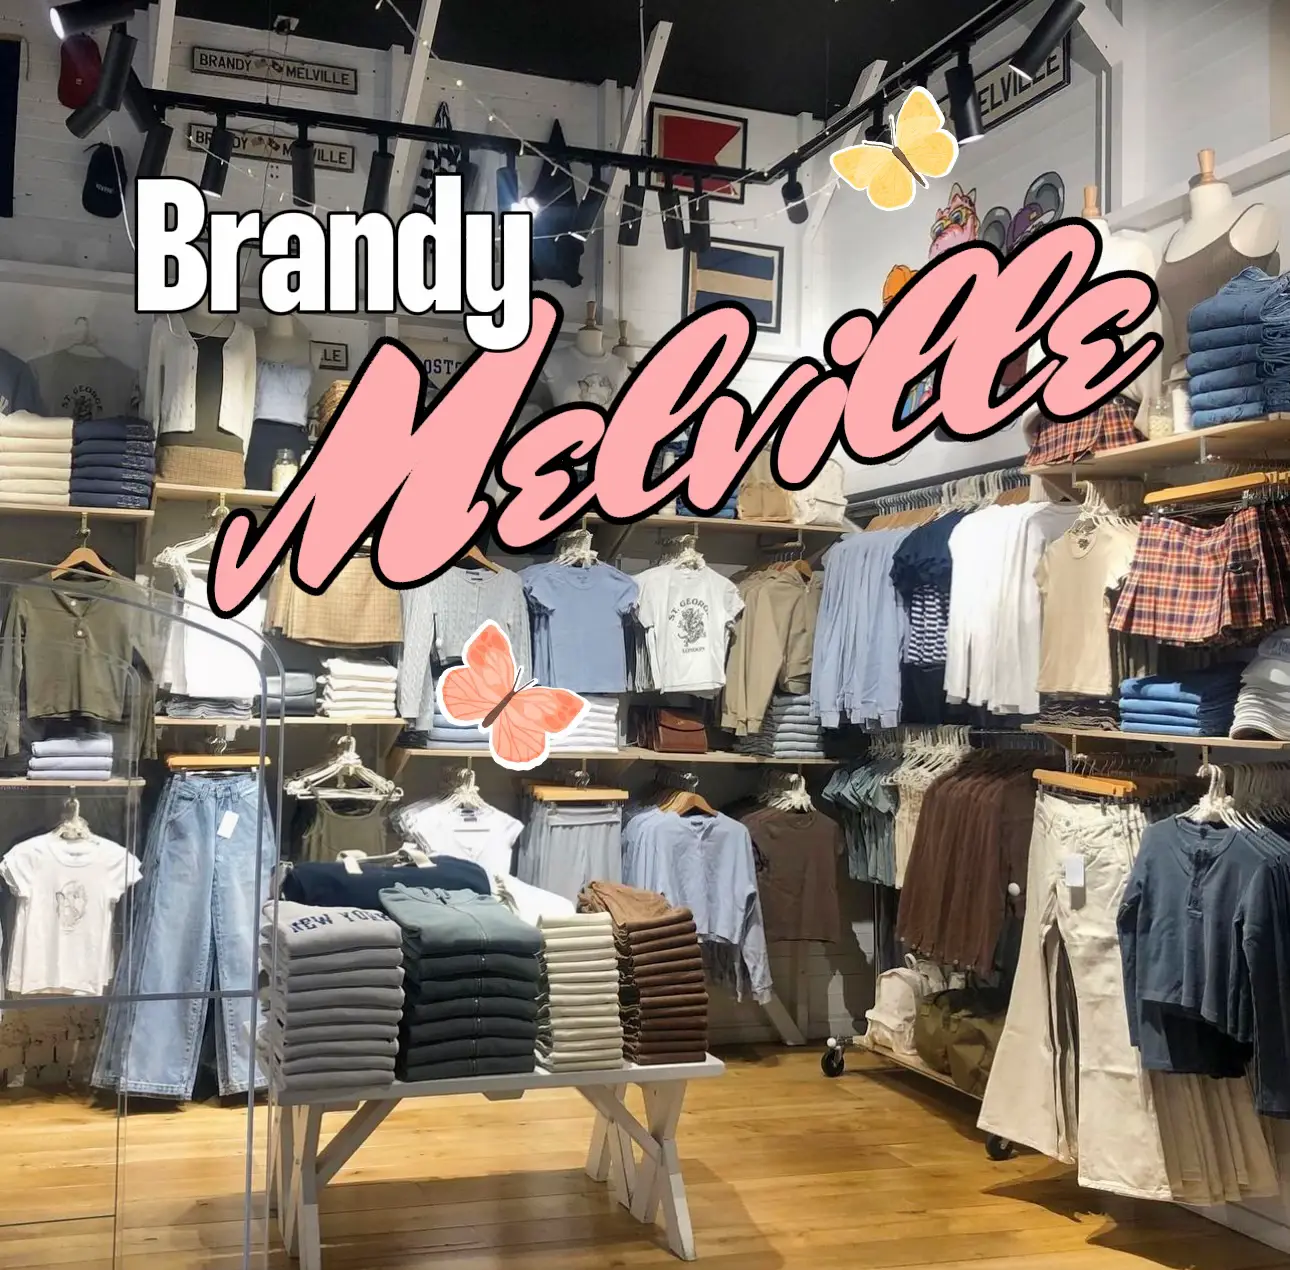 valentines day outfit ❣️  Brandy melville outfits, Tank outfit,  Valentine's day outfit